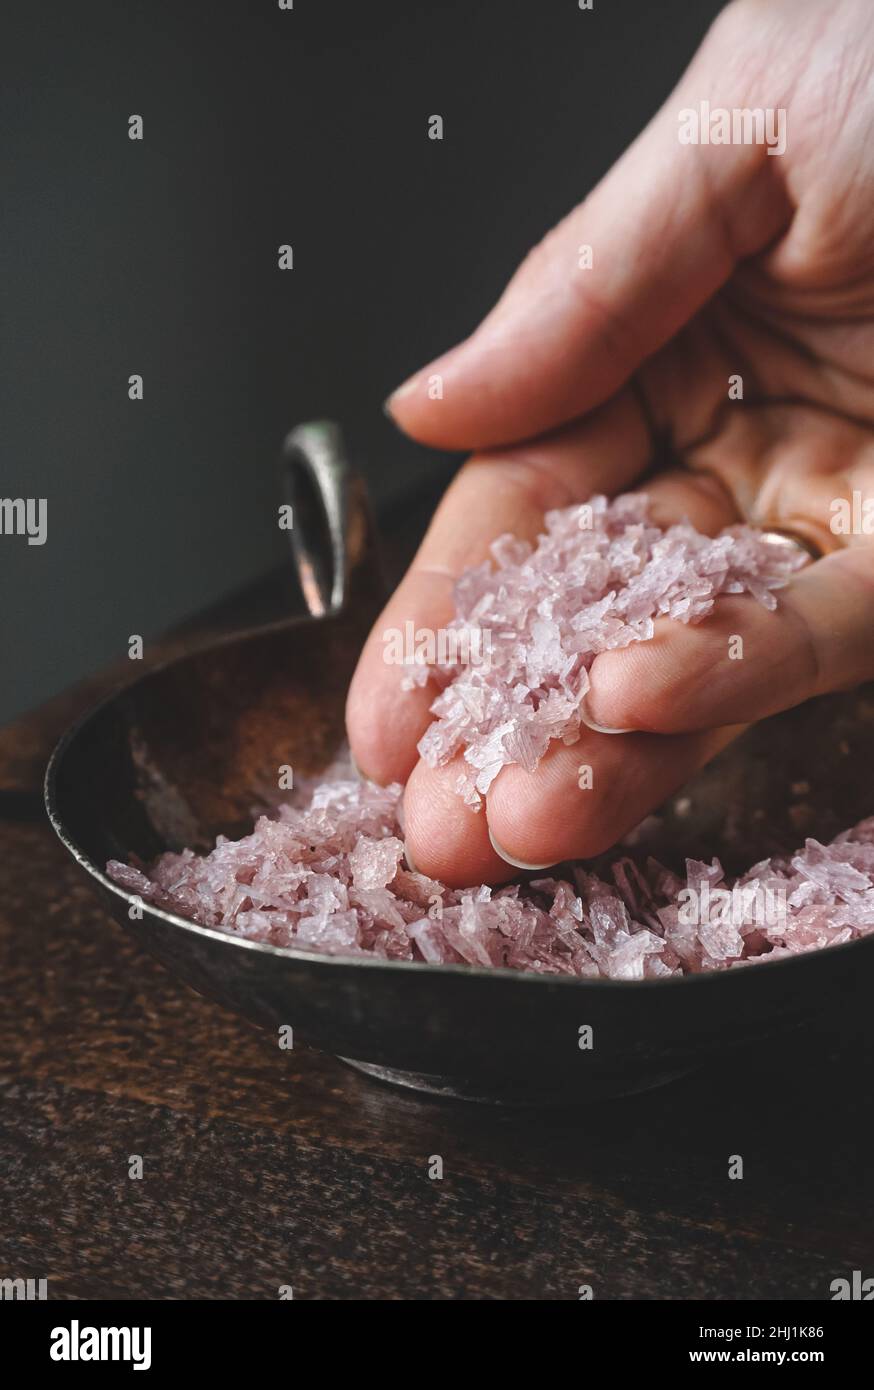 Flakes of pink wine salt in a woman's hands Stock Photo